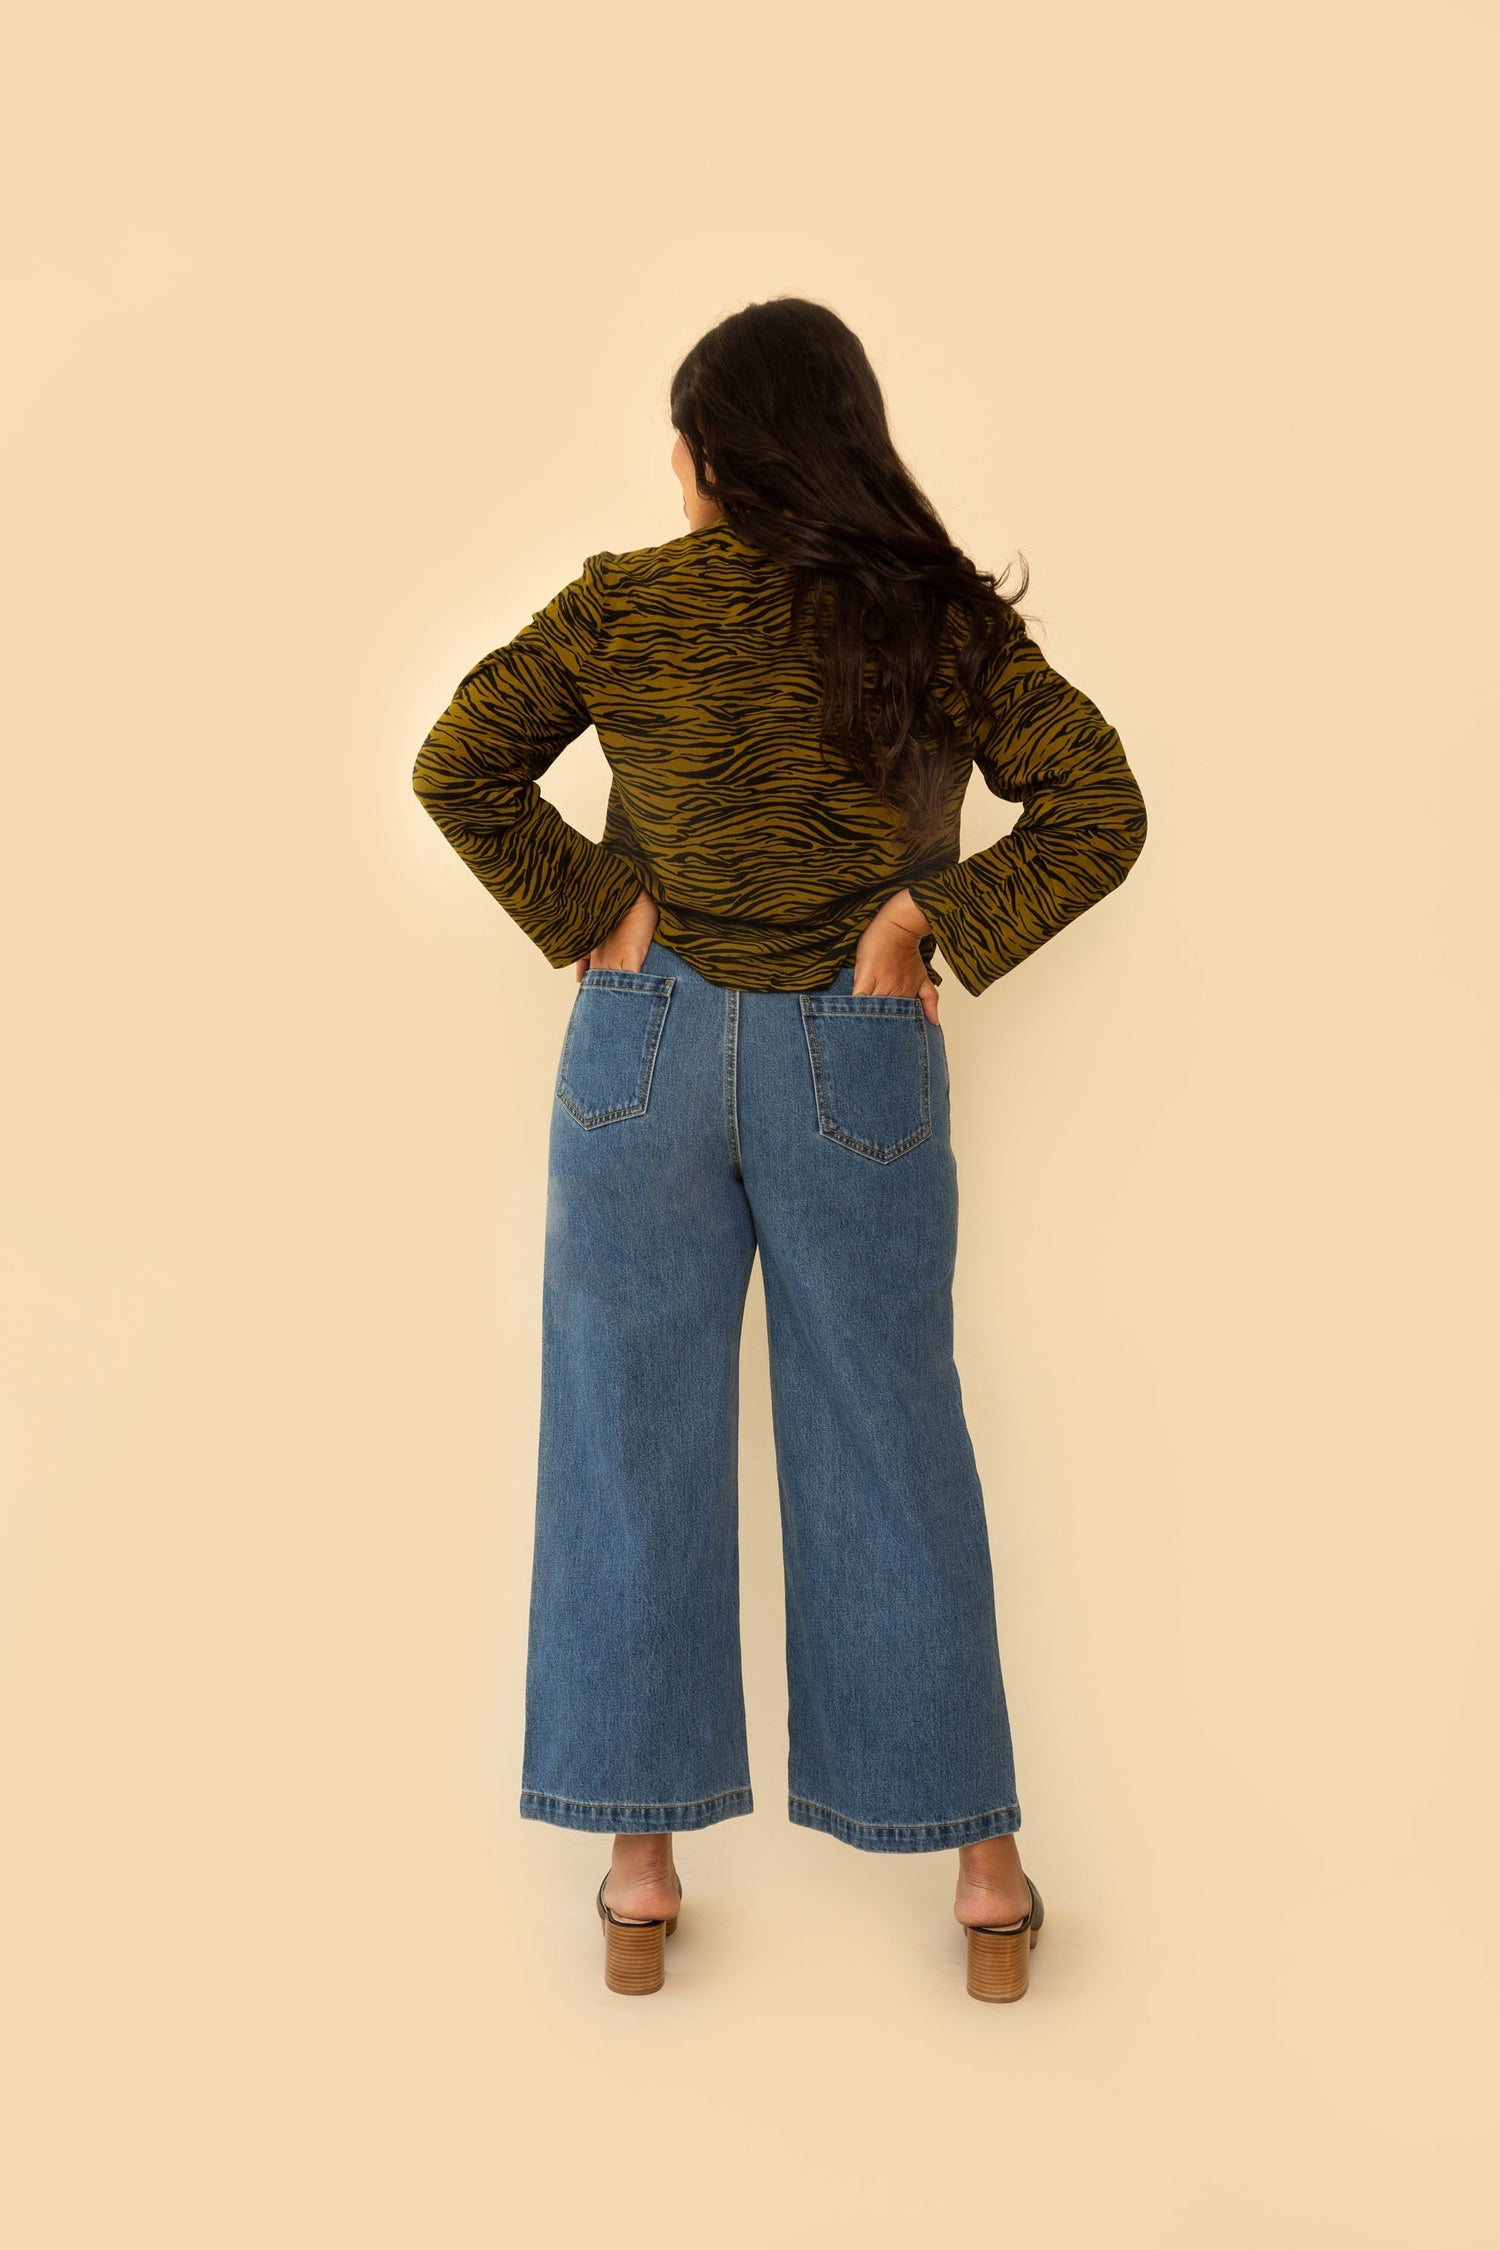 Whimsy + Row Flora Pants in Dark Denim. High rise, wide leg pant with a chunky button - what more could you ask for? This classic pair of jeans is also made from 100% organic cotton. Ethically and sustainably-made for every season.